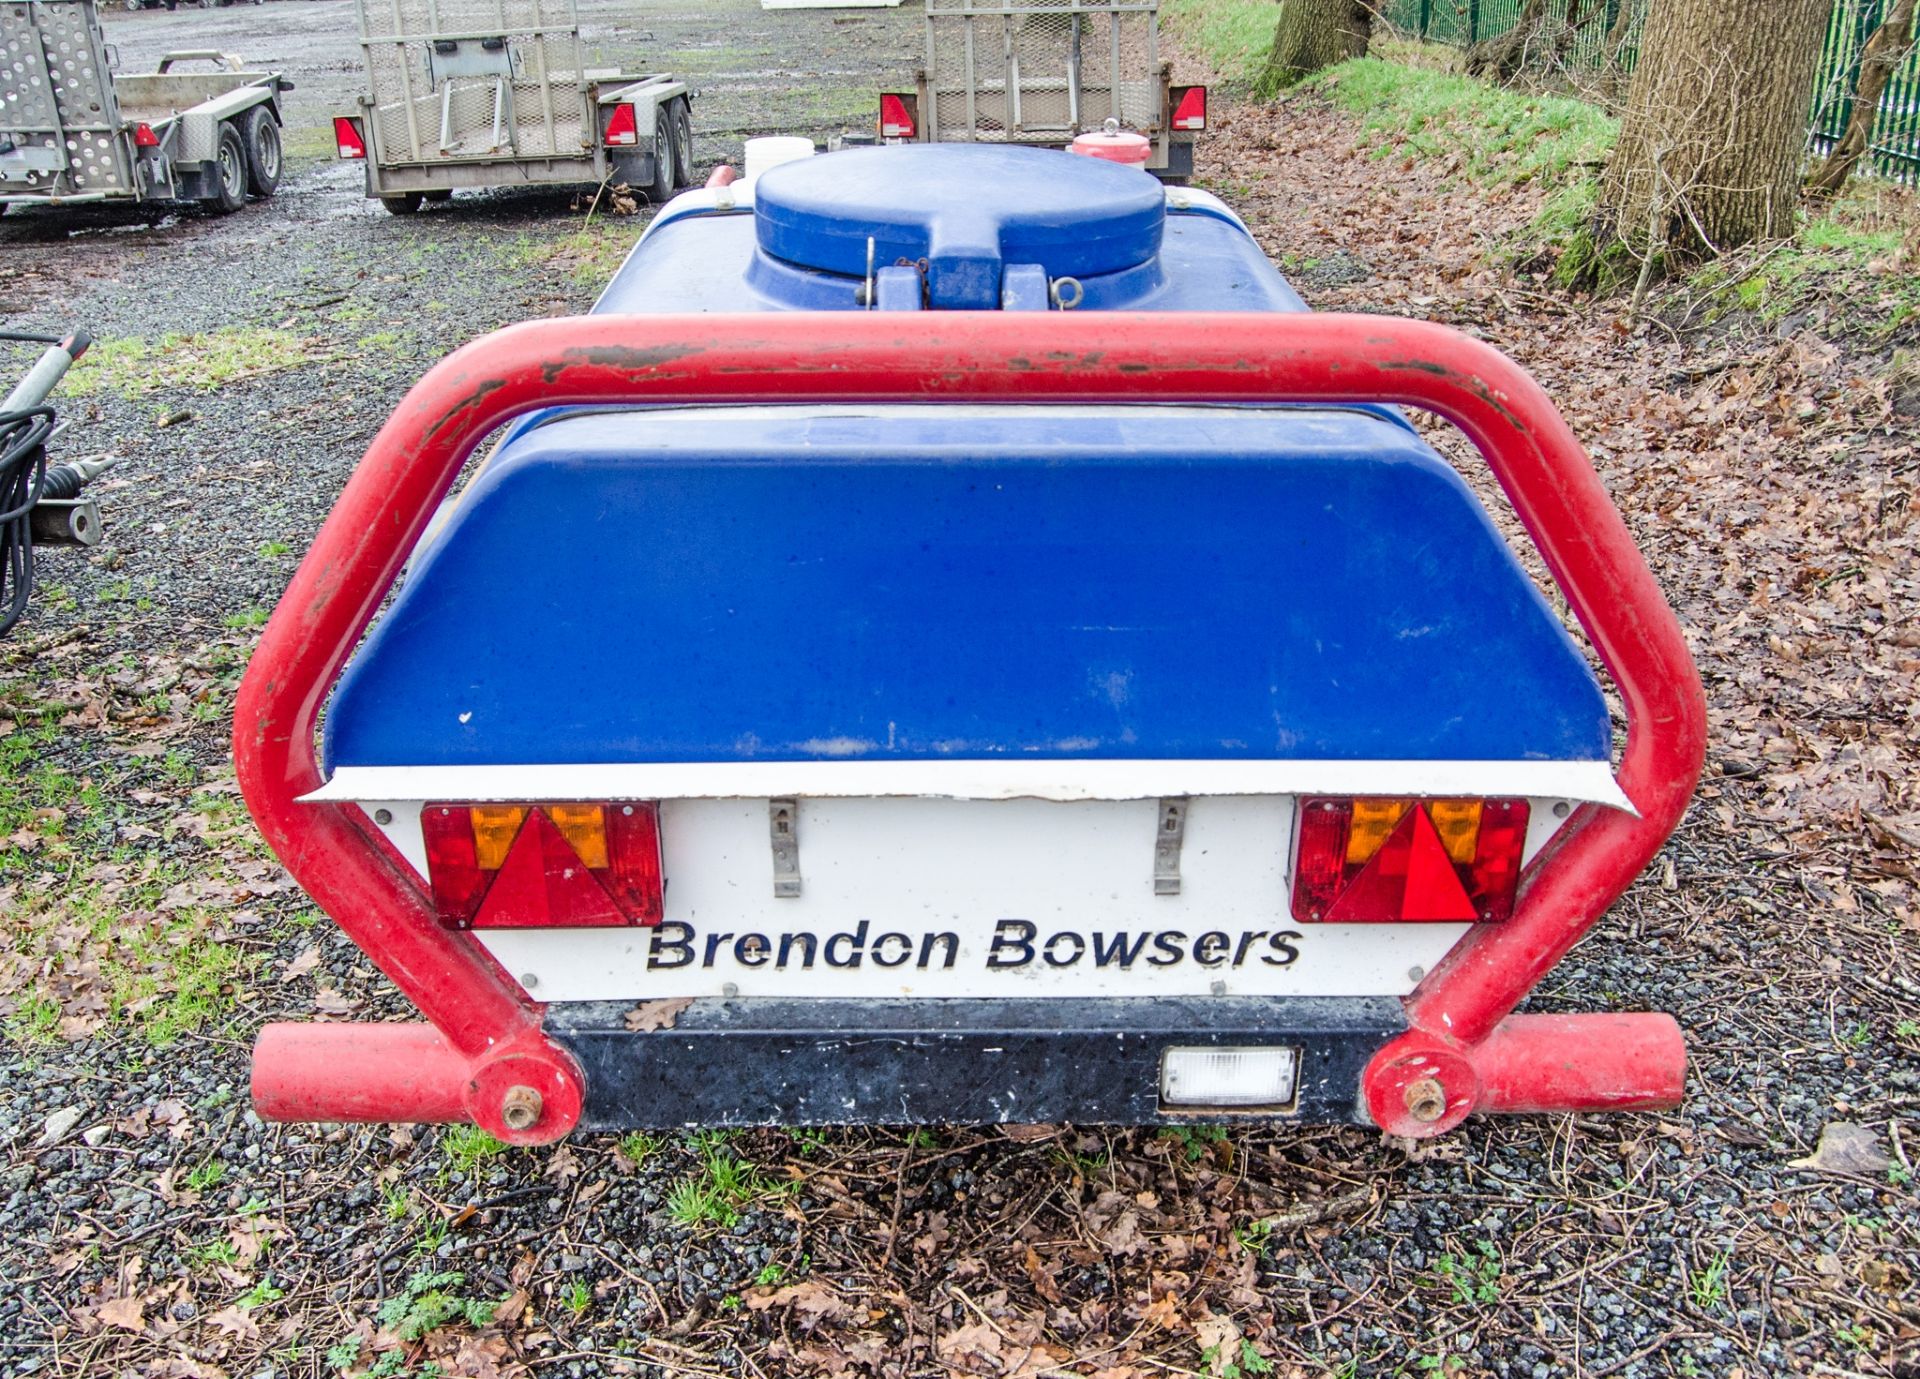 Brendon Bowsers diesel driven fast tow mobile pressure washer bowser BPW037 ** Injector missing ** - Image 4 of 6